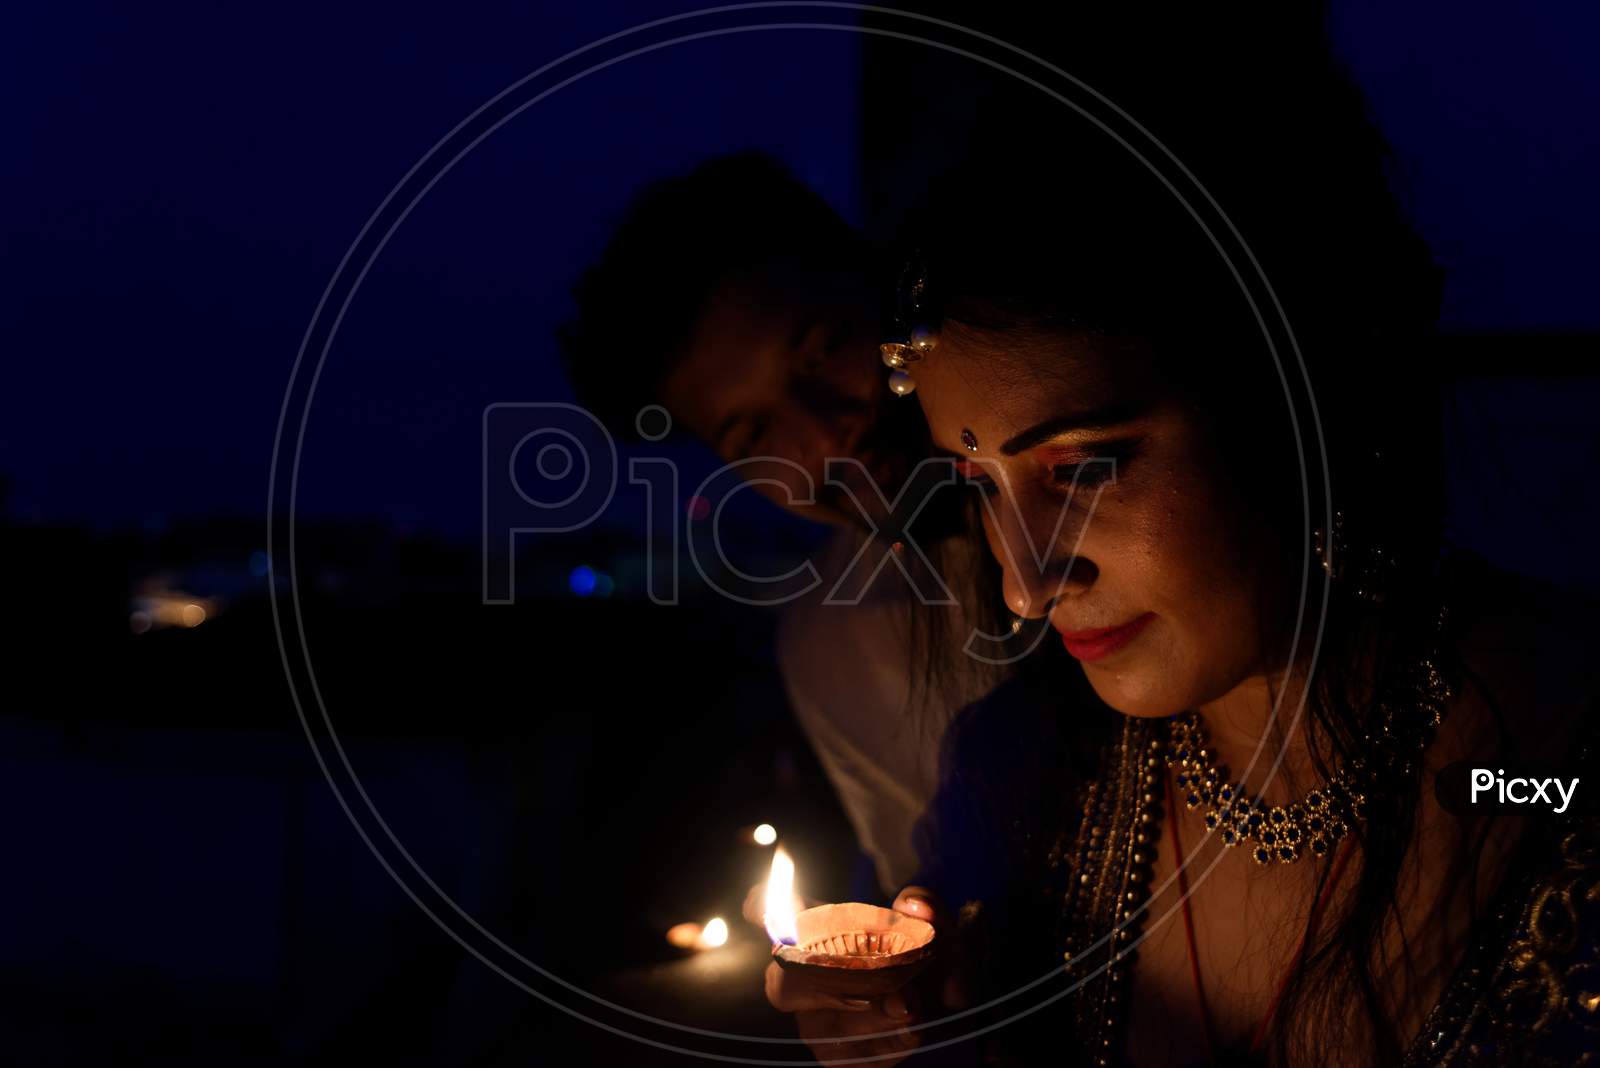 Young and beautiful Indian Gujarati couple in Indian traditional dress lightening Diwali diya/lamps on the terrace in darkness on Diwali evening. Indian lifestyle and Diwali celebration